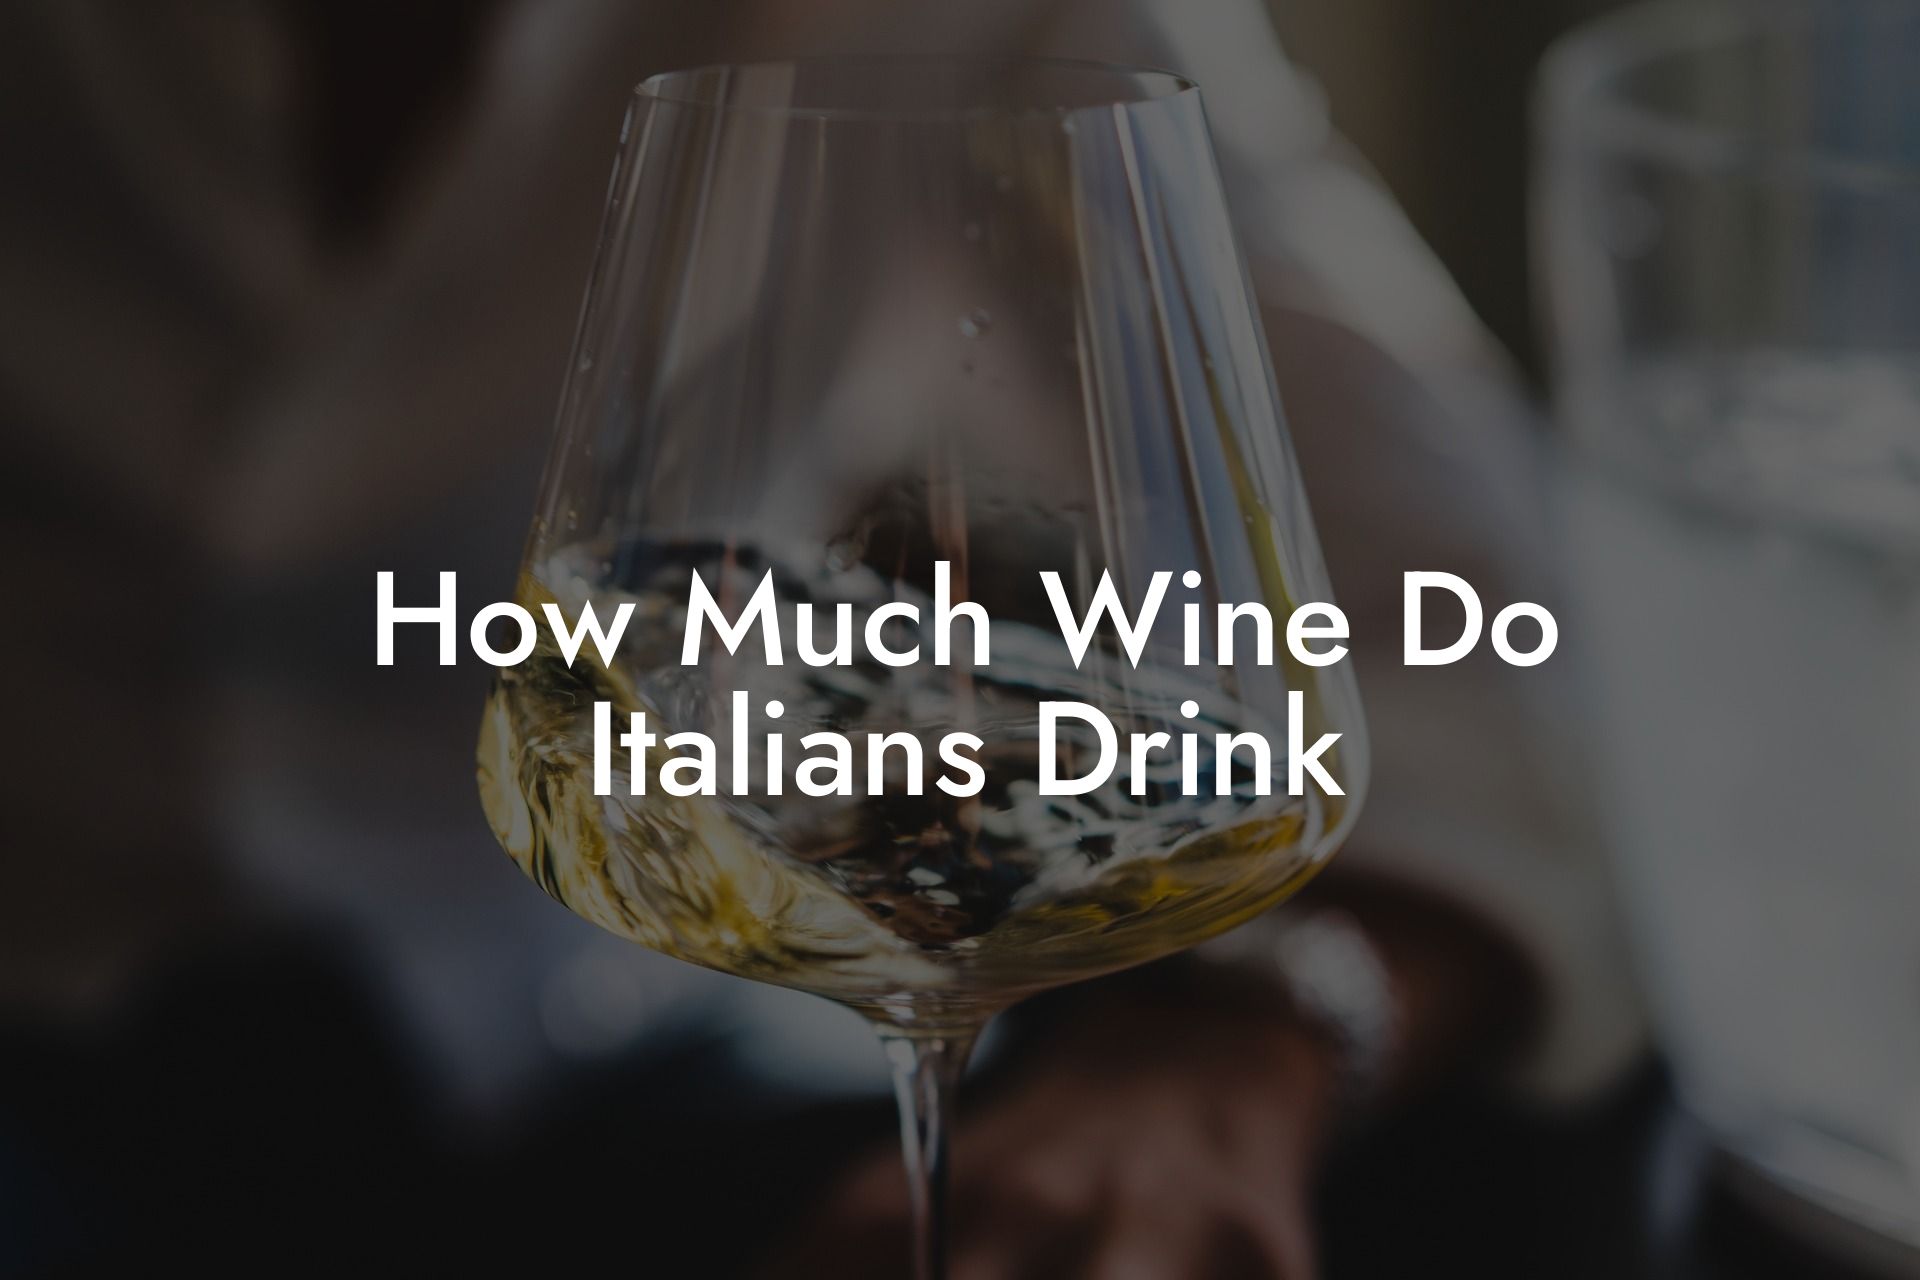 How Much Wine Do Italians Drink